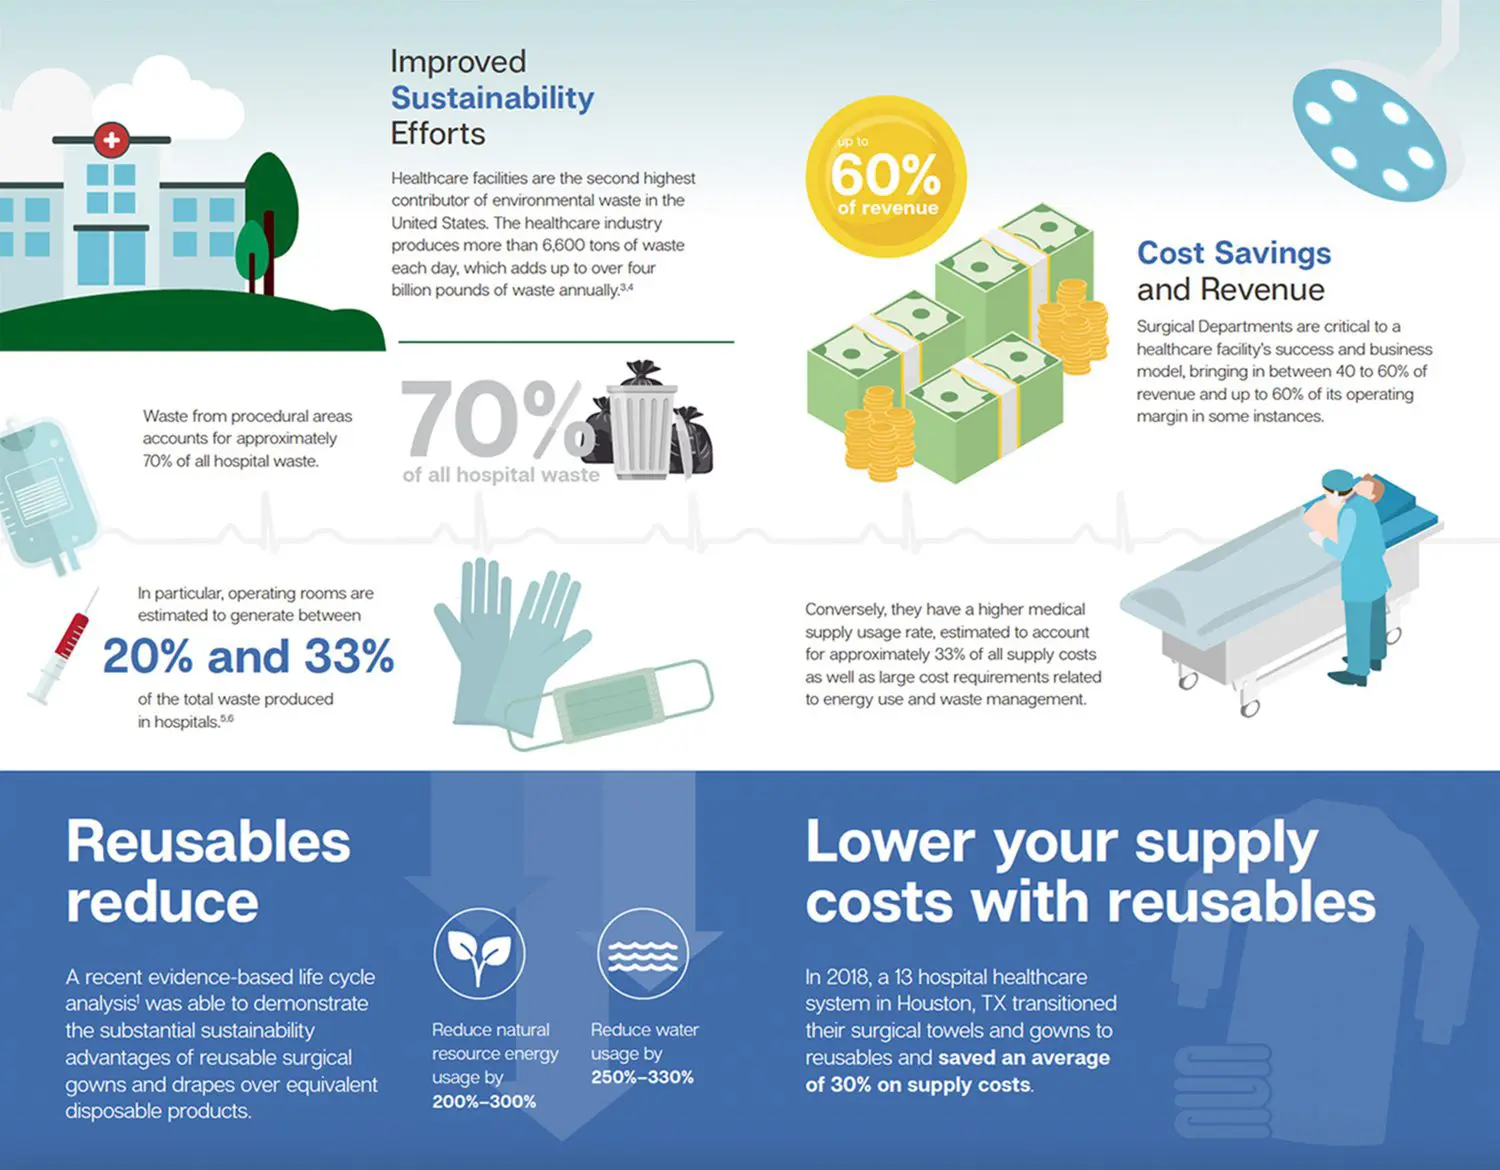 Image shows an infographic proving SurgiTex reusables lower costs and improve sustainability efforts.